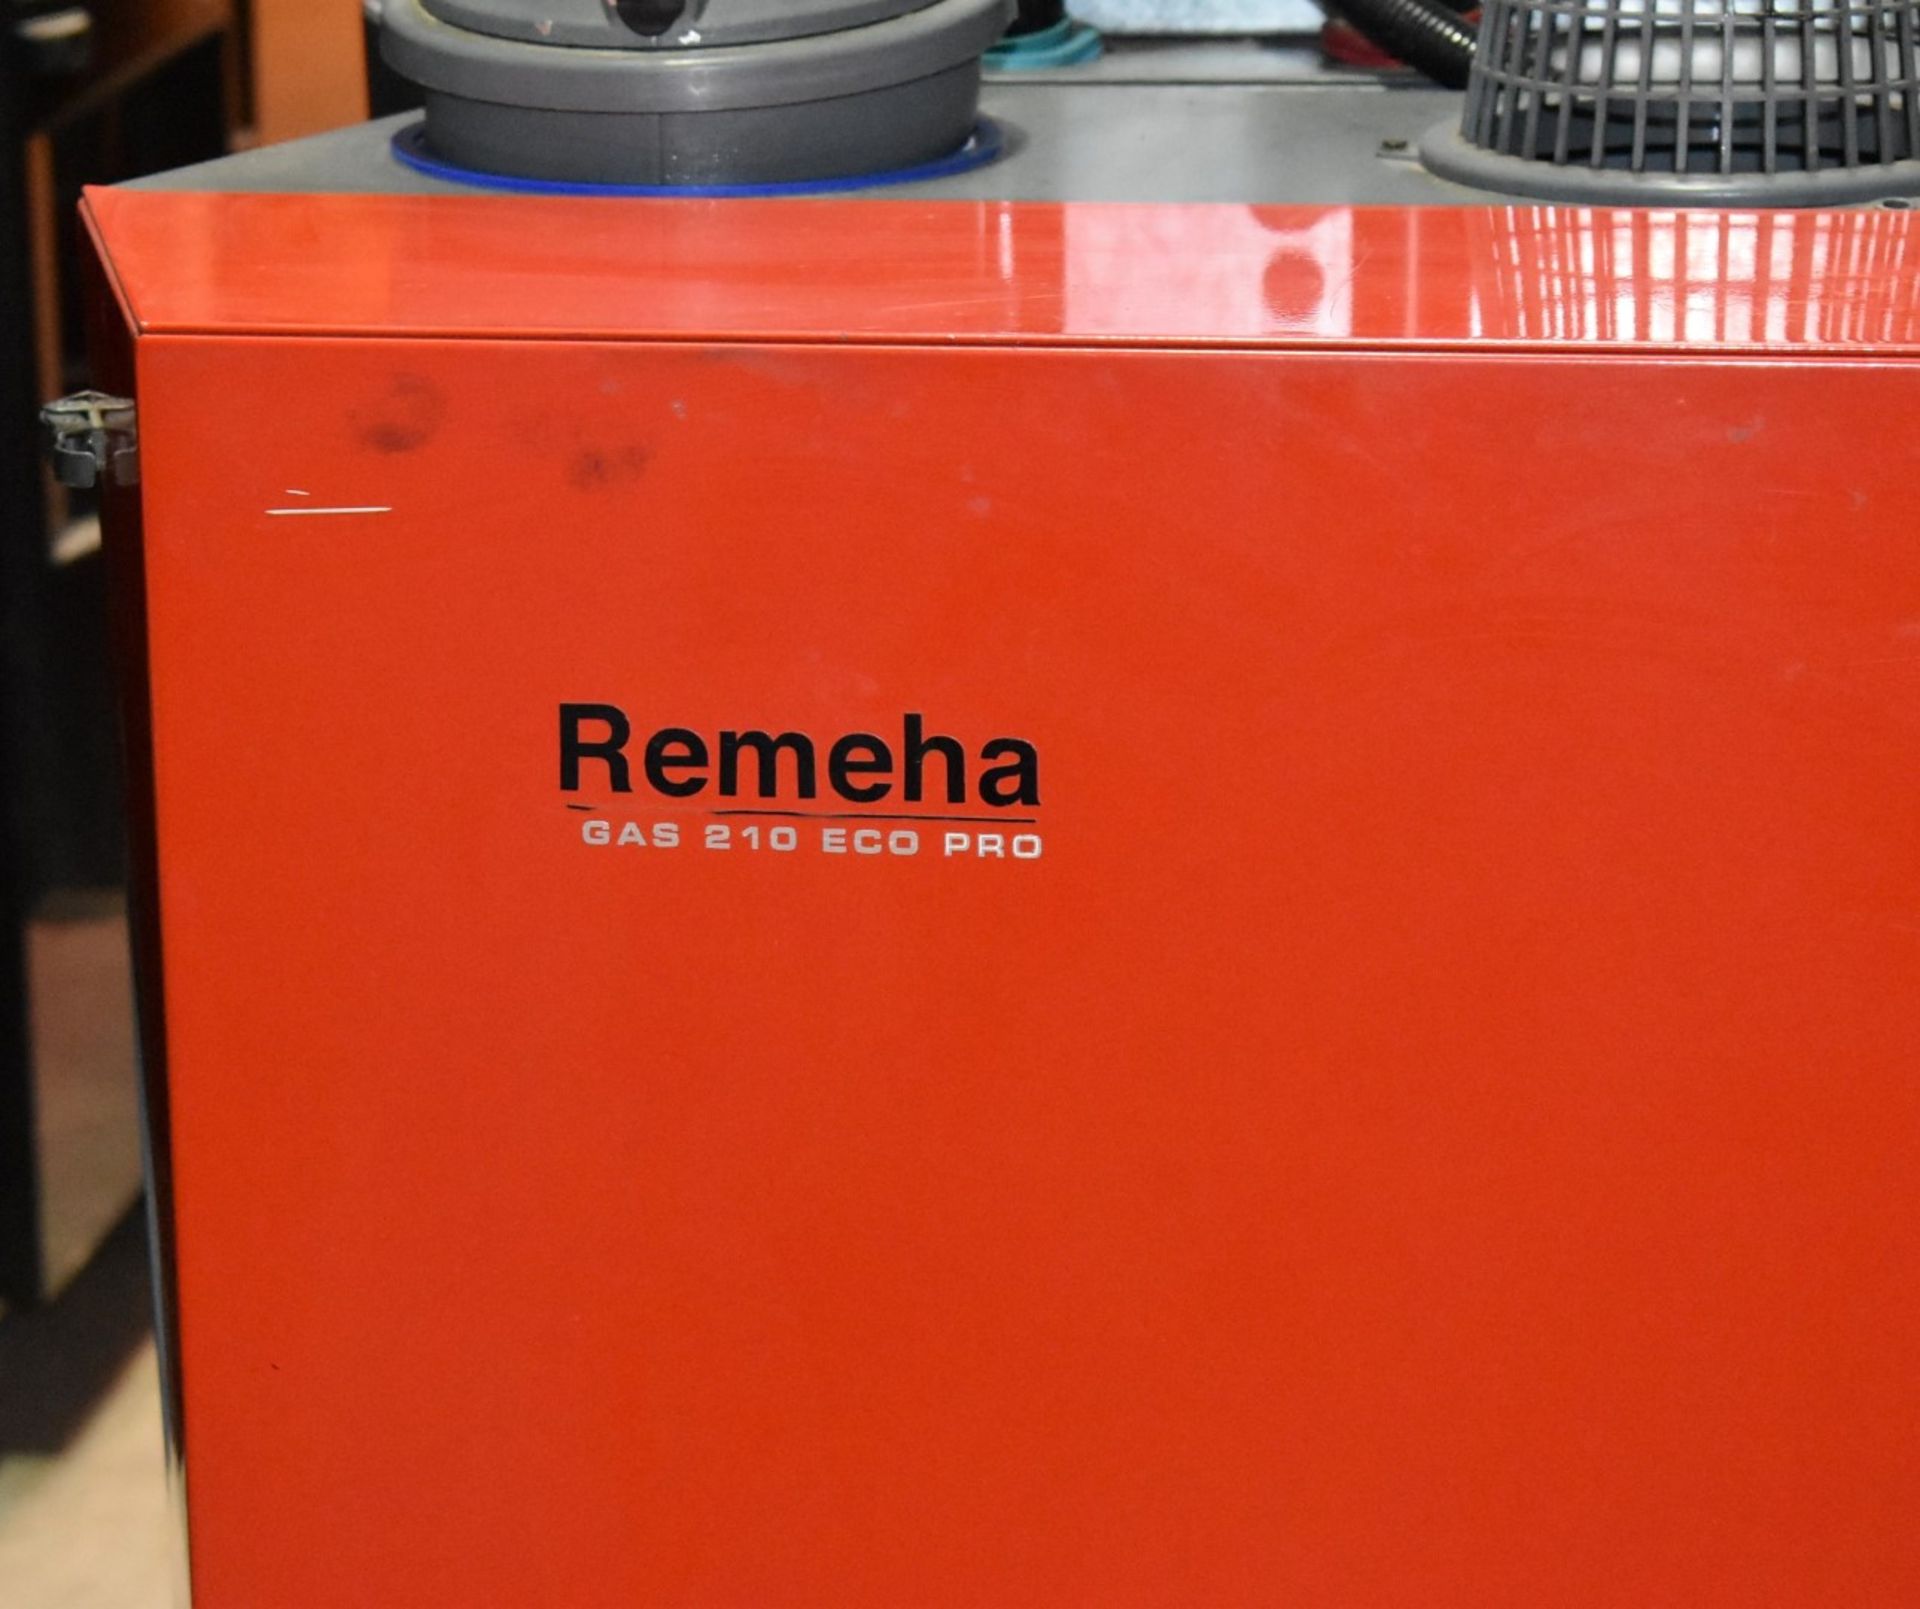 1 x Brohag Remeha Gas 210 Eco Pro Floor Standing Commercial Boiler - Ref: WH2-140 H7B - CL711 - - Image 2 of 11